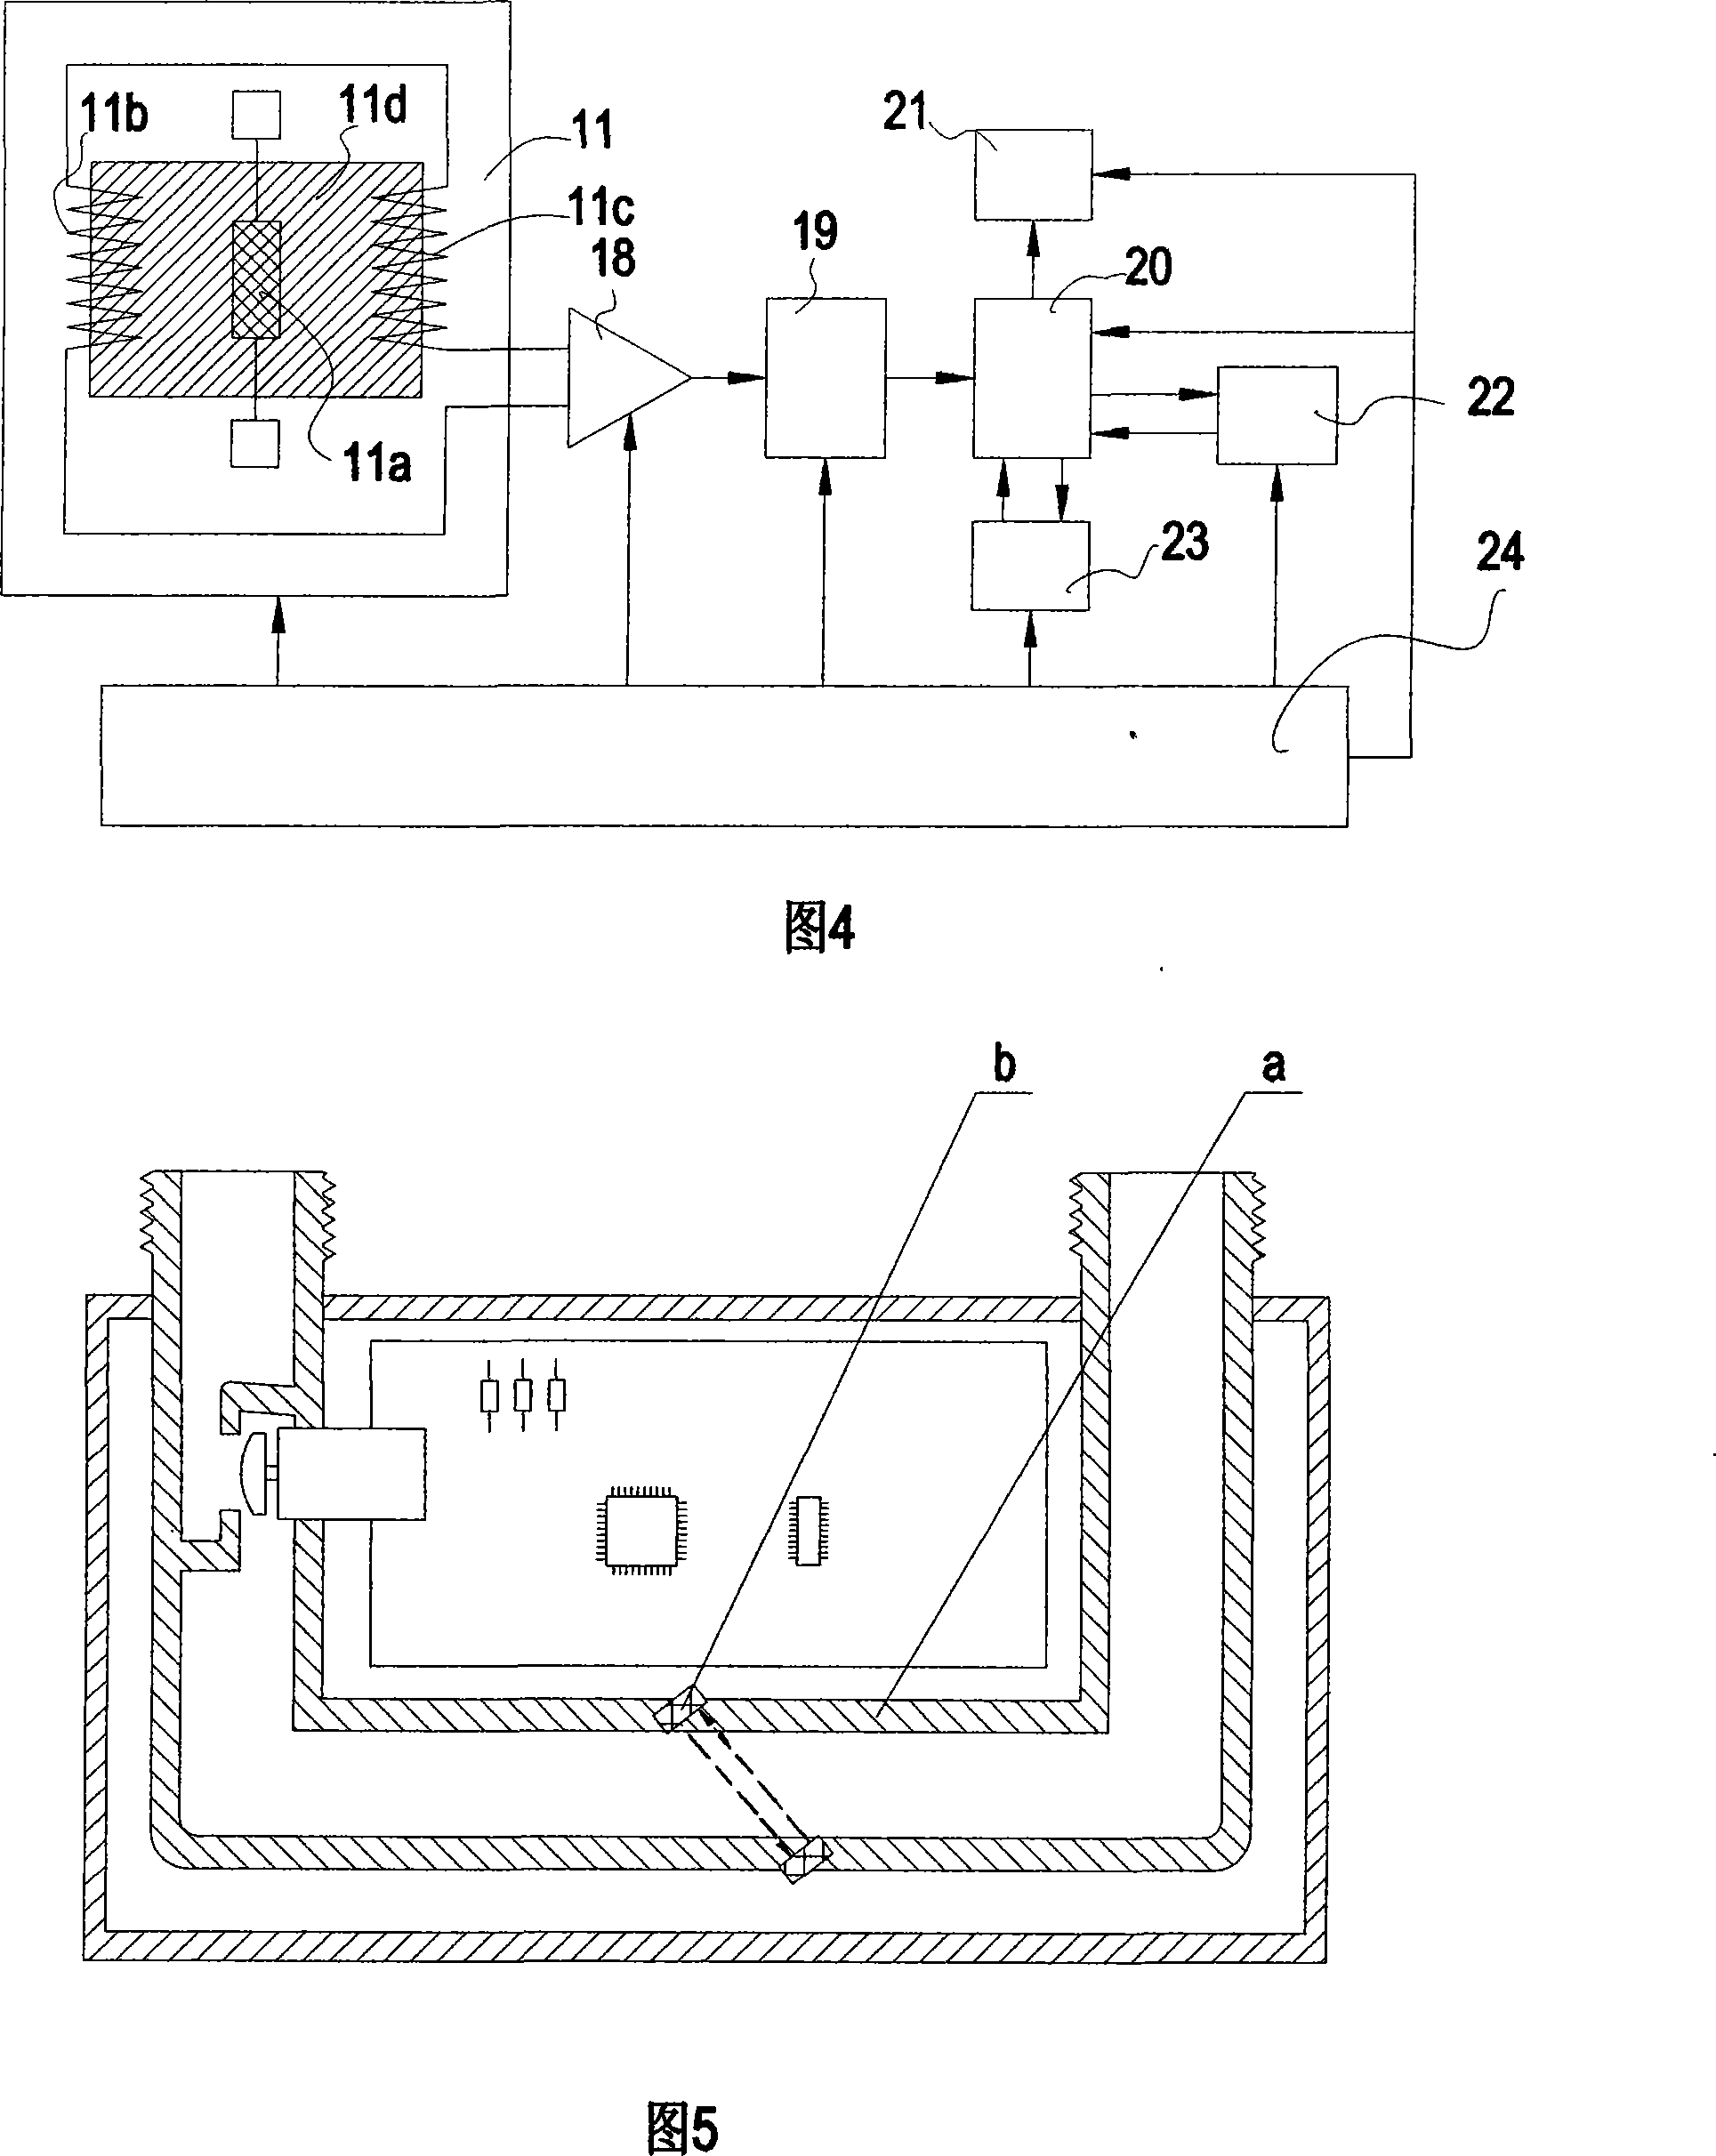 Electronic gas meter for mass and flow